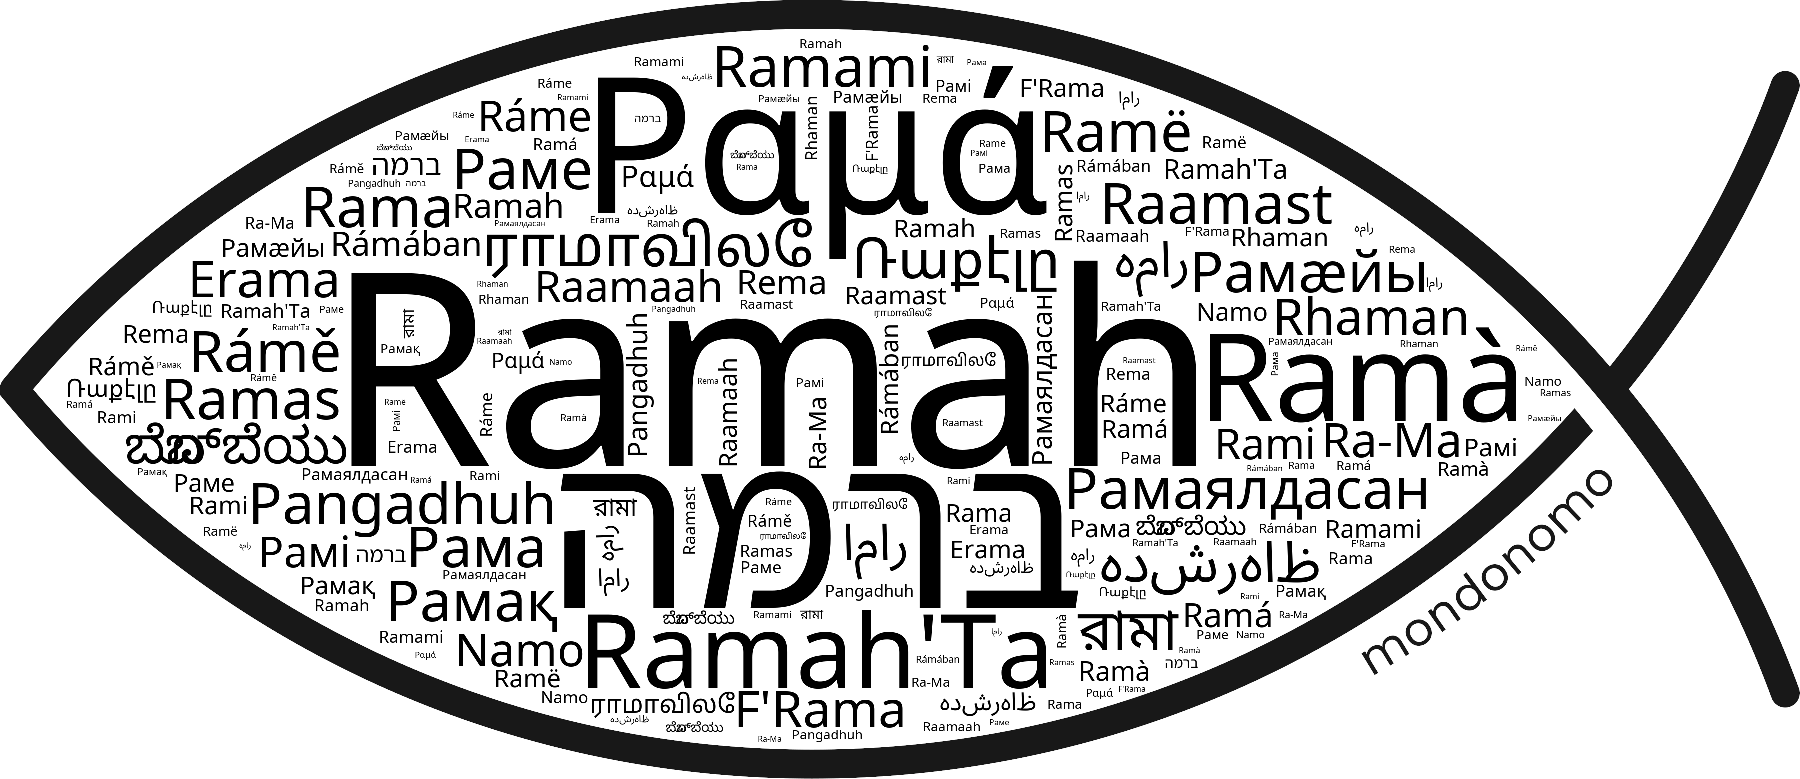 Name Ramah in the world's Bibles